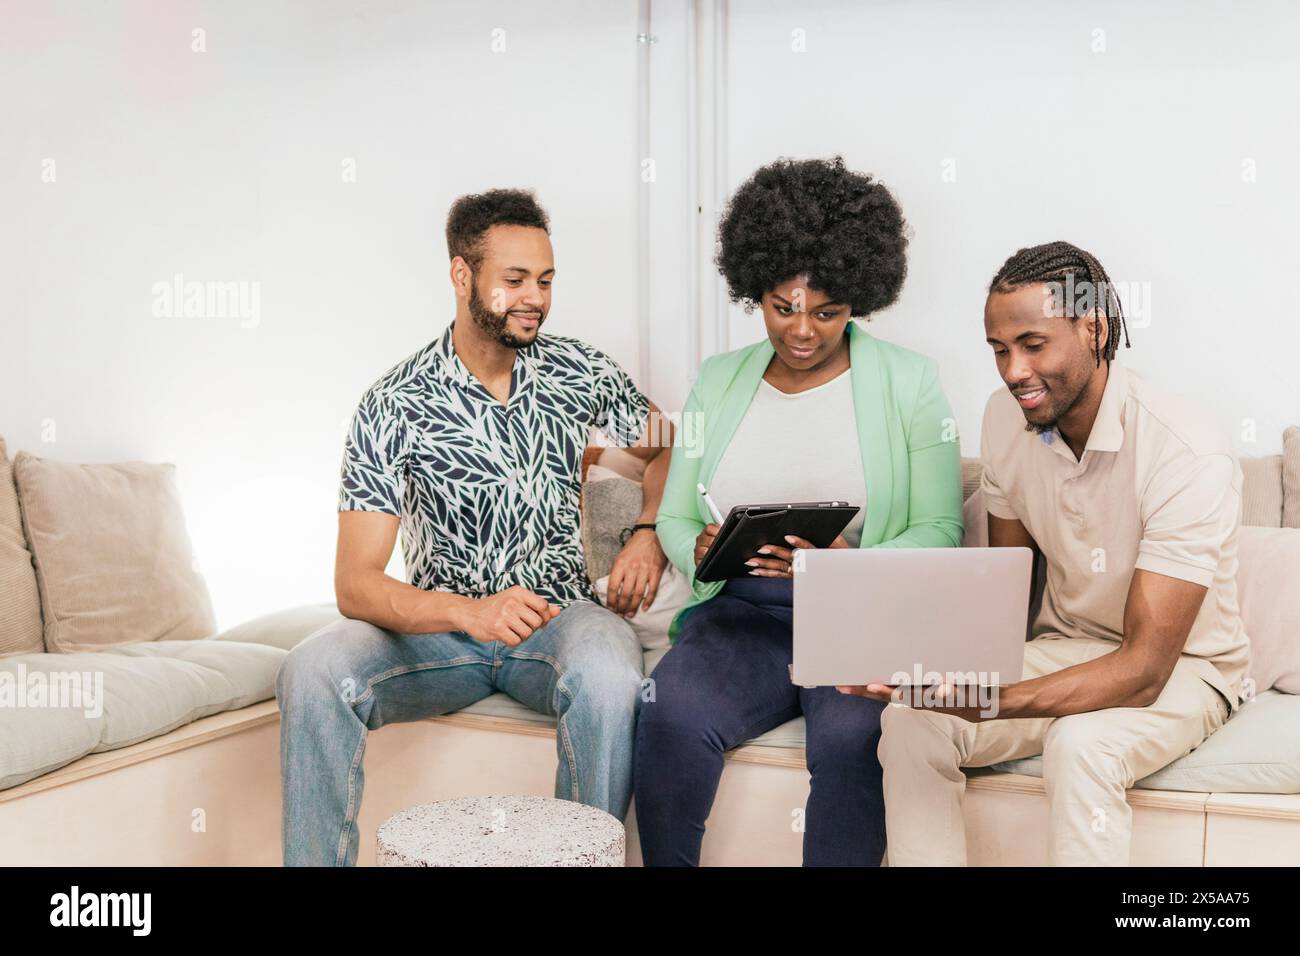 Three professionals engage in a coworking session, sharing ideas on a tablet and a laptop in a comfortable home environment Stock Photo